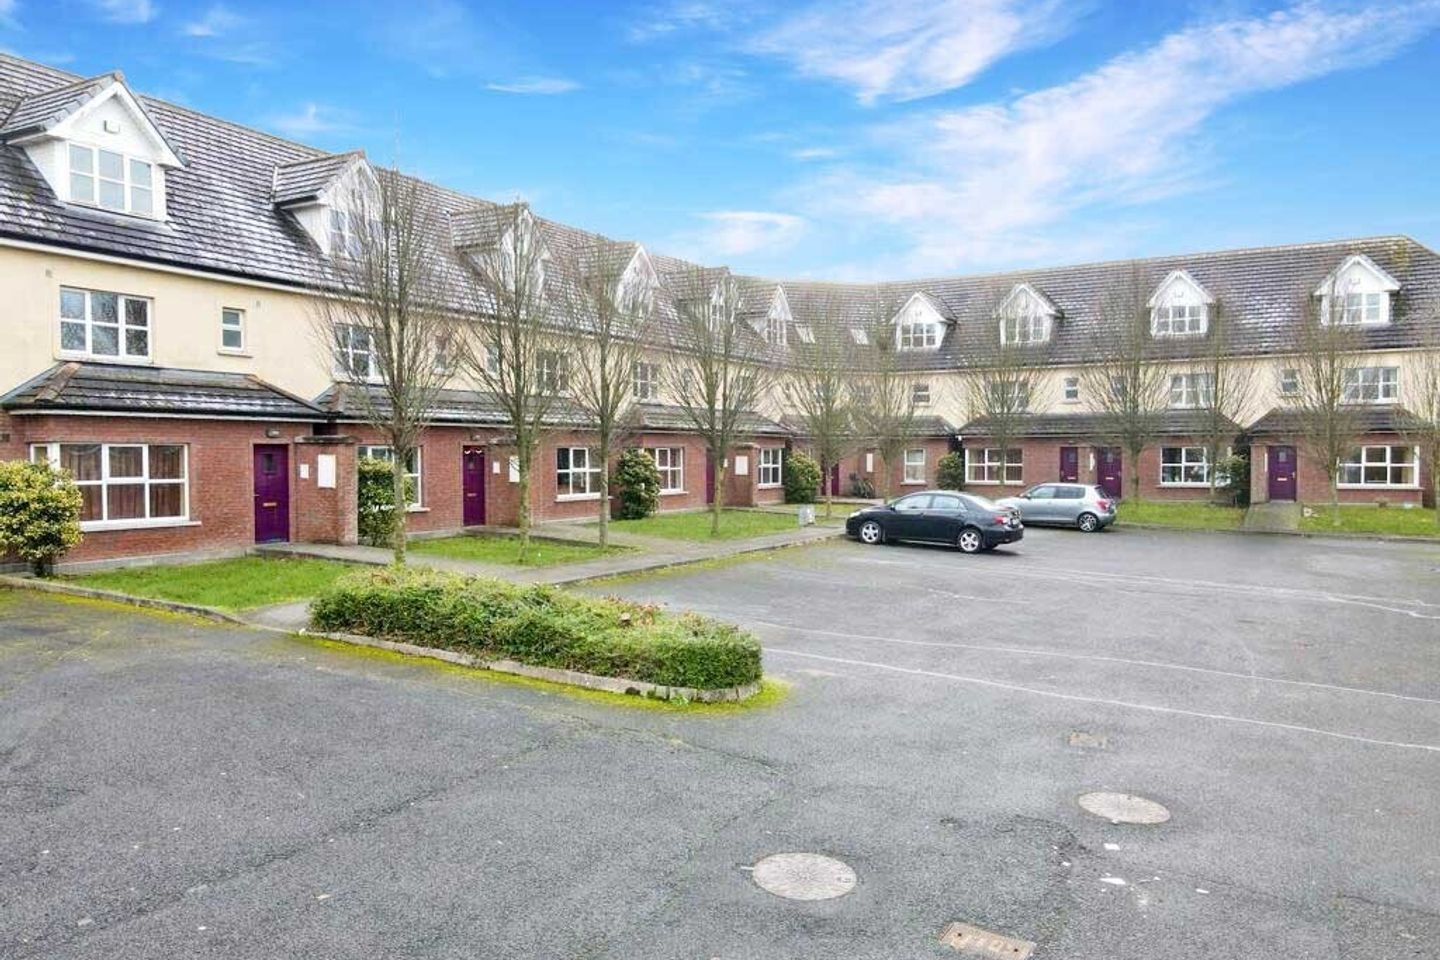 21-25 The Lodges, Dublin Road, Nenagh, Co. Tipperary